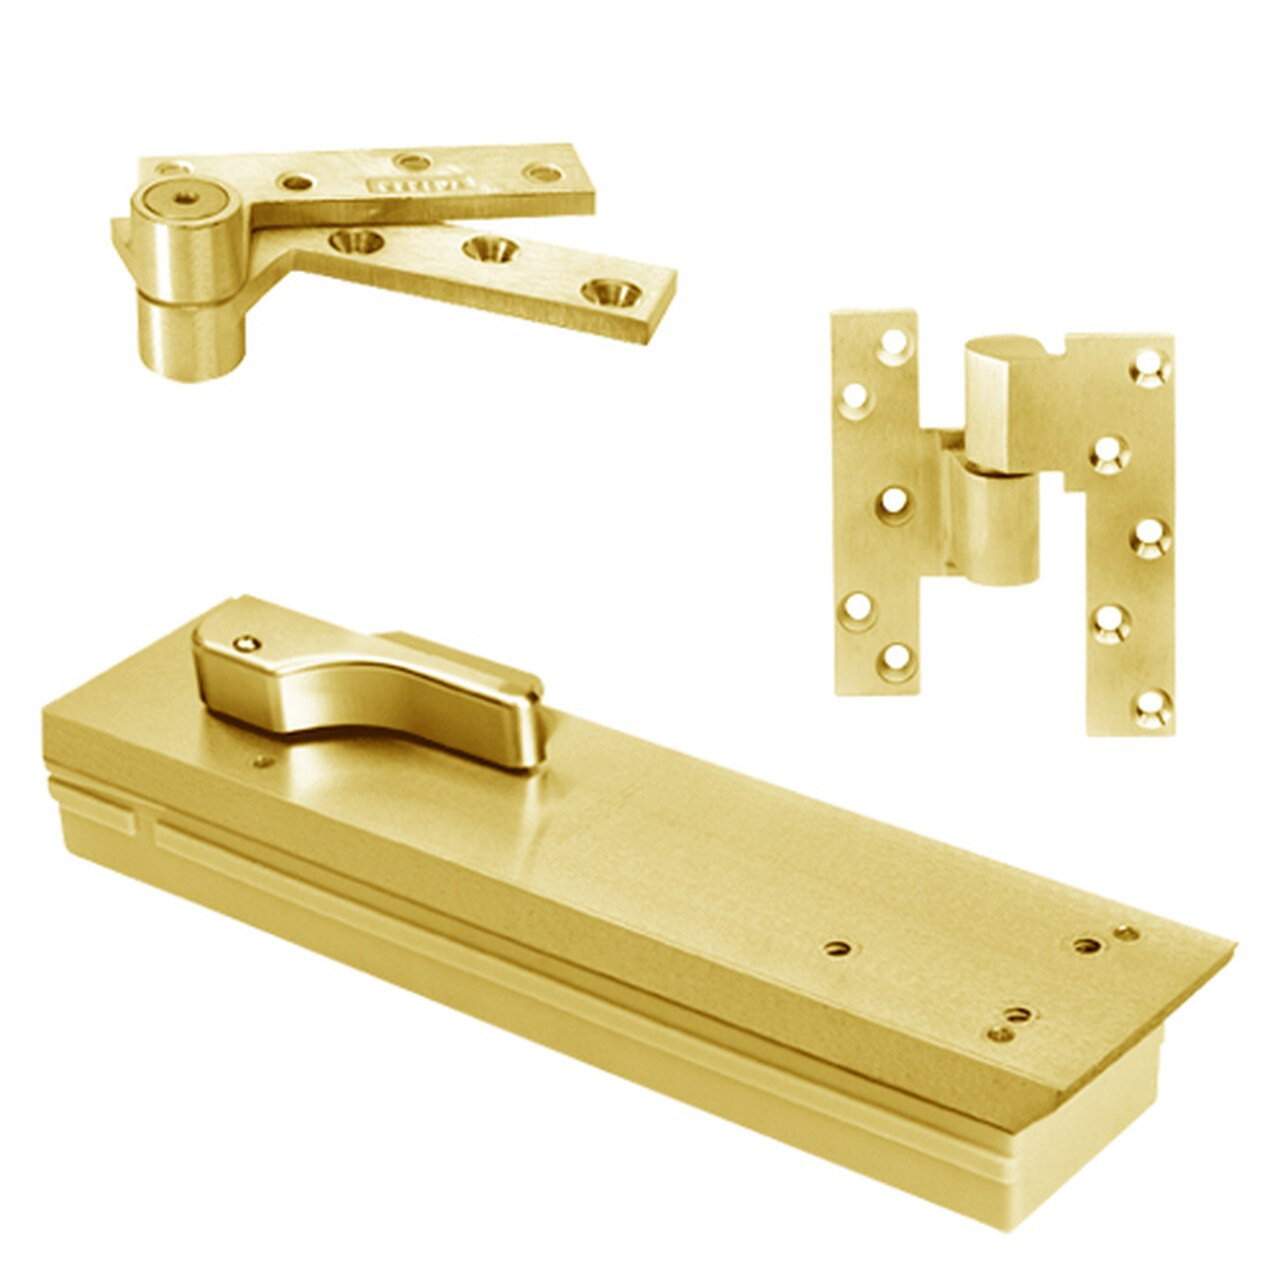 FQ5103NBC-LCC-LH-605 Rixson Q51 Series Fire Rated 3/4" Offset Hung Shallow Depth Floor Closers in Bright Brass Finish